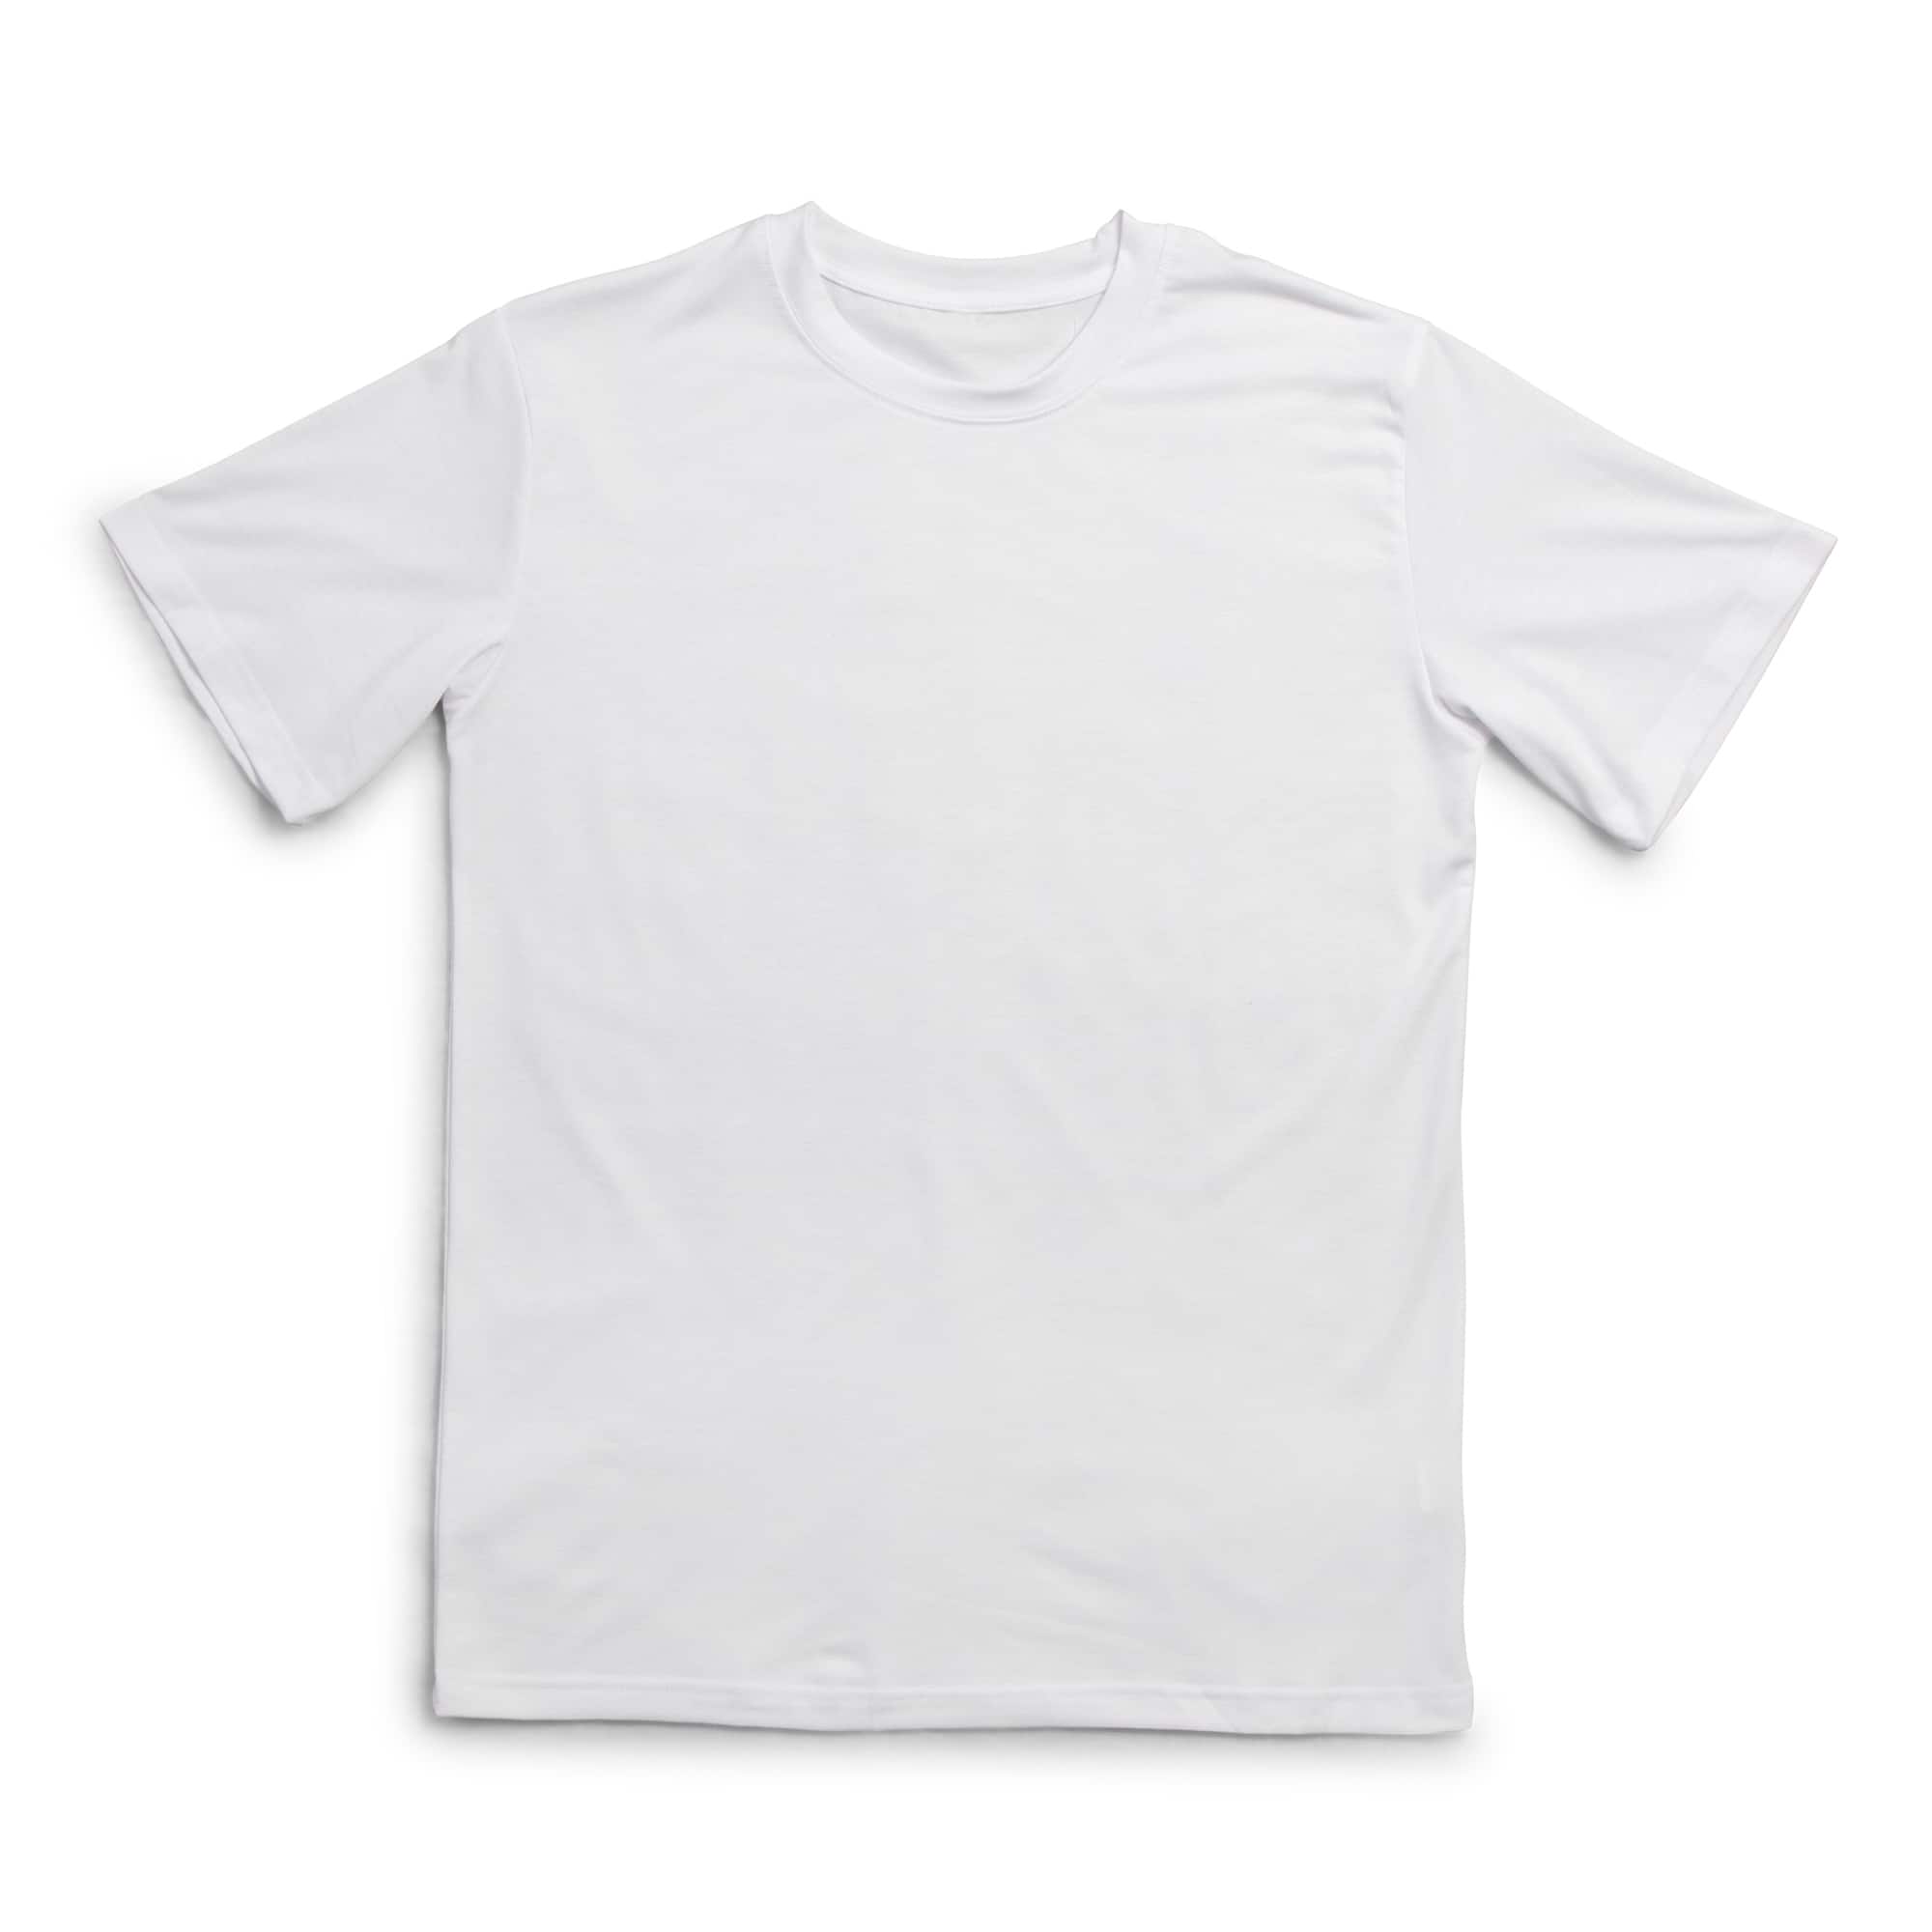 5 pack-Kids Sublimation T-Shirts in White (95% Polyester-5% Spandex) w –  SDN SUBLIMATION